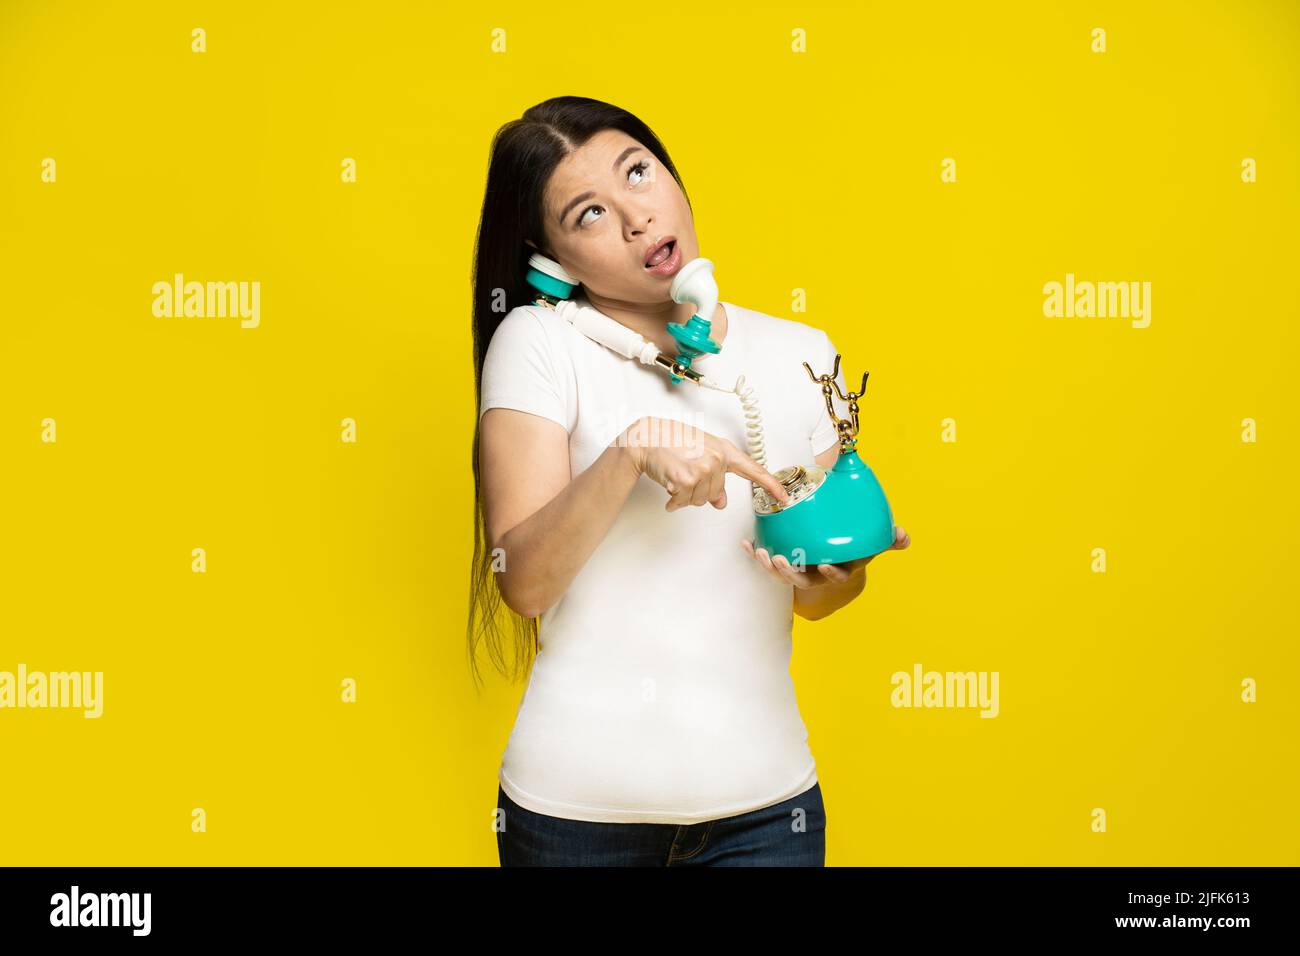 Funny asian woman using vintage, retro telephone in hands dreamingly dialling trying to remember phone number face expression wearing white t-shirt isolated on yellow background. Stock Photo